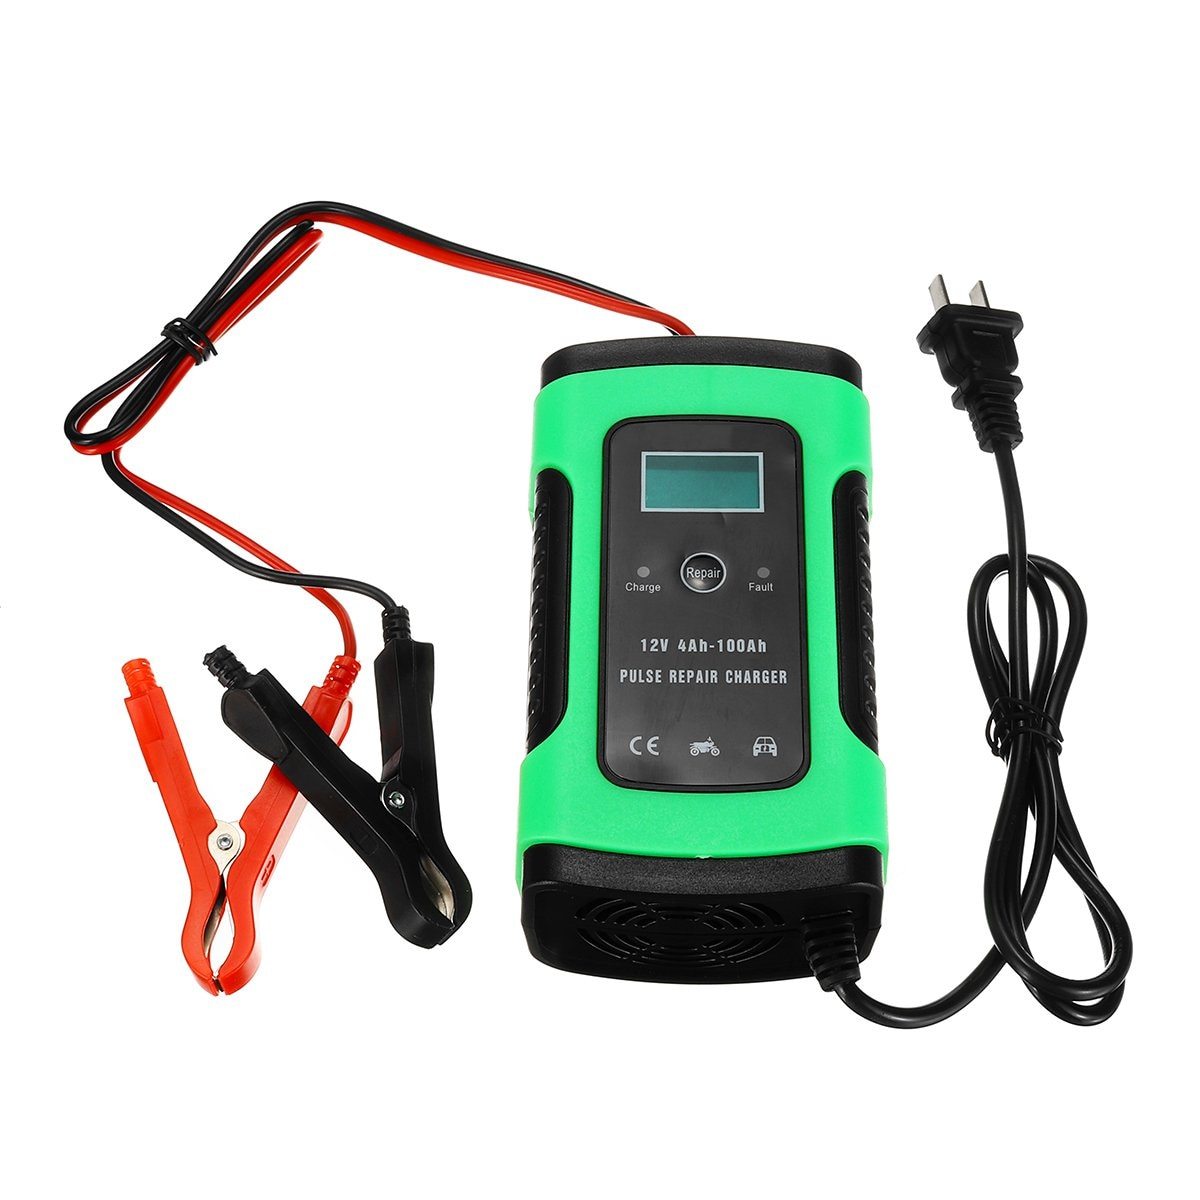 12V 5A Auto Car Intelligent Battery Charger Jump Starter LCD Intelligent 100-240V 100AH Pulse Repair Type